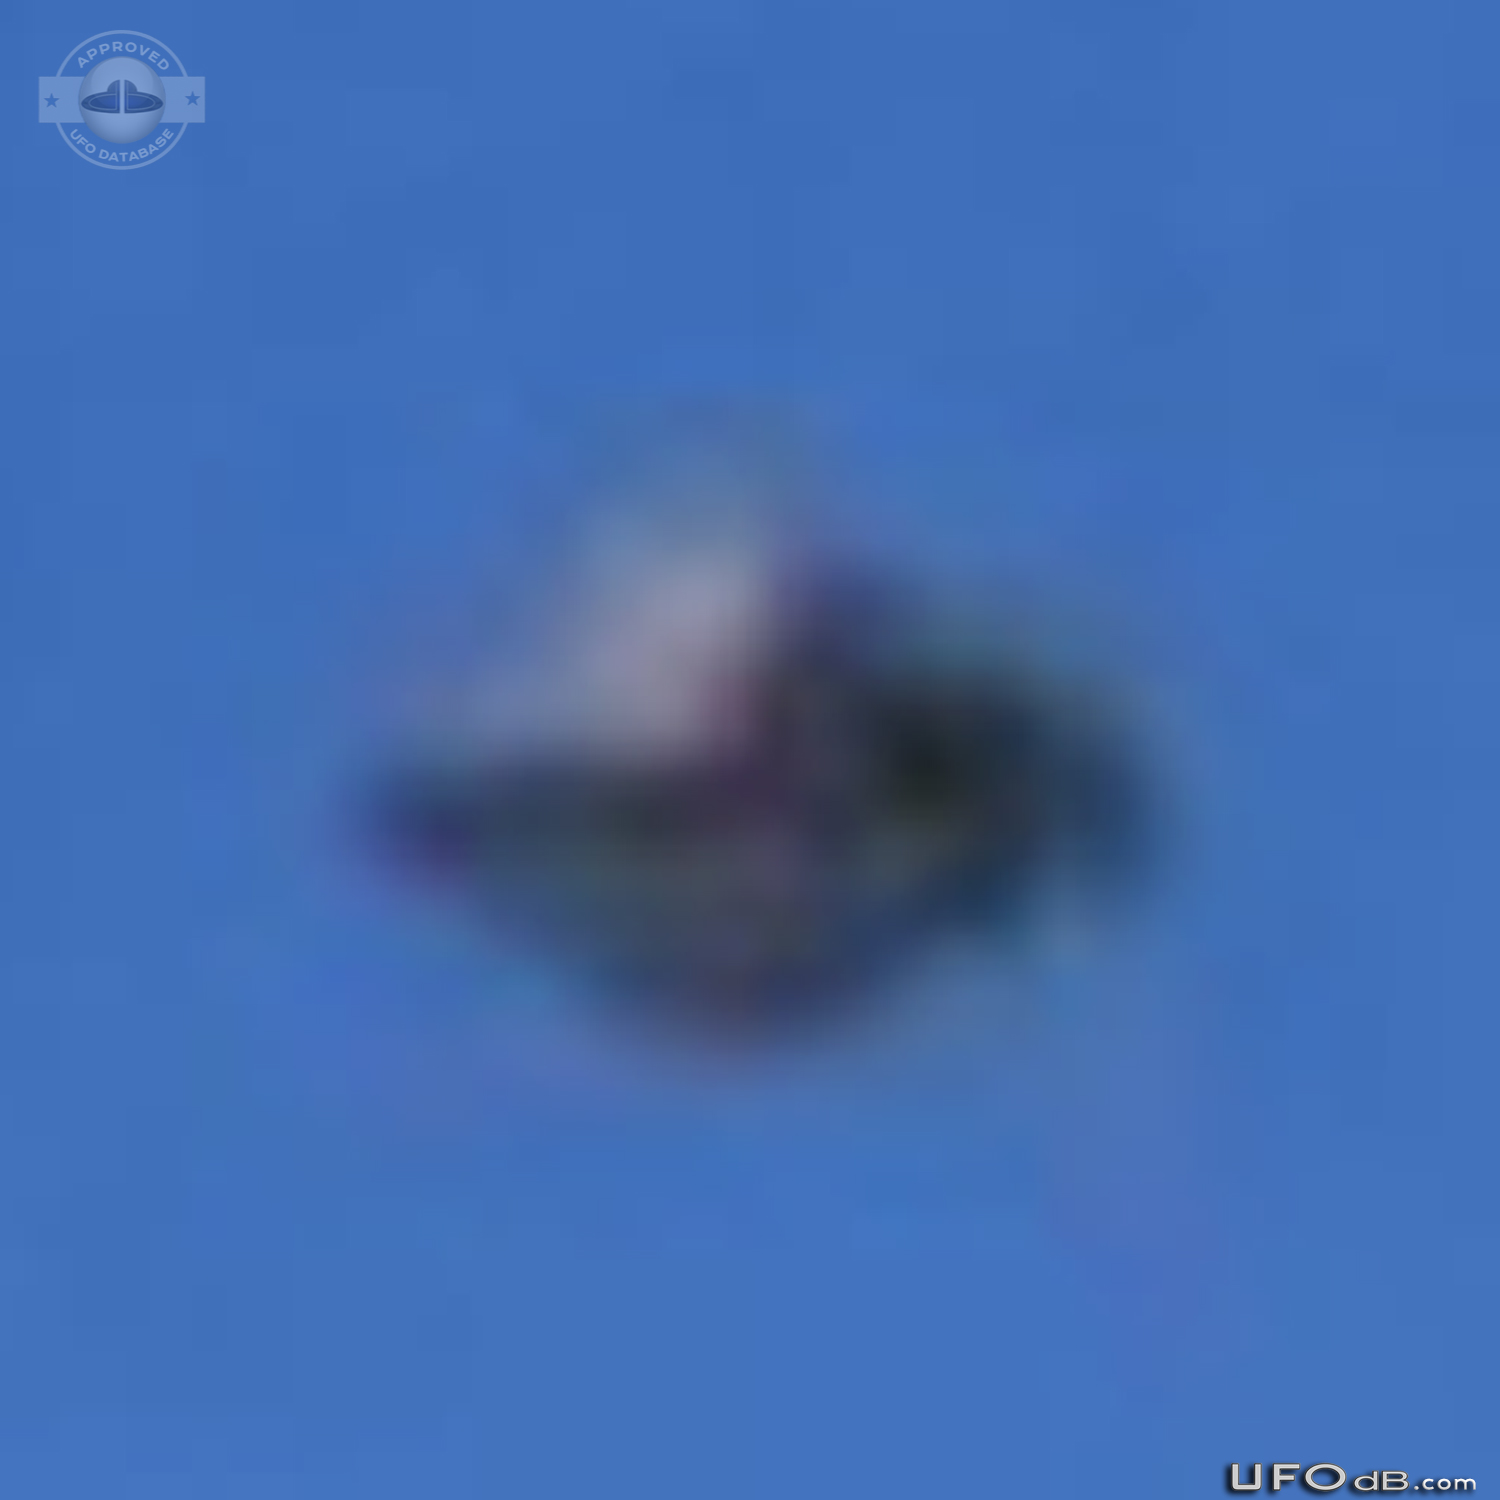 A UFO is photograph in the Icy mountains of Tibet, China February 2011 UFO Picture #251-5